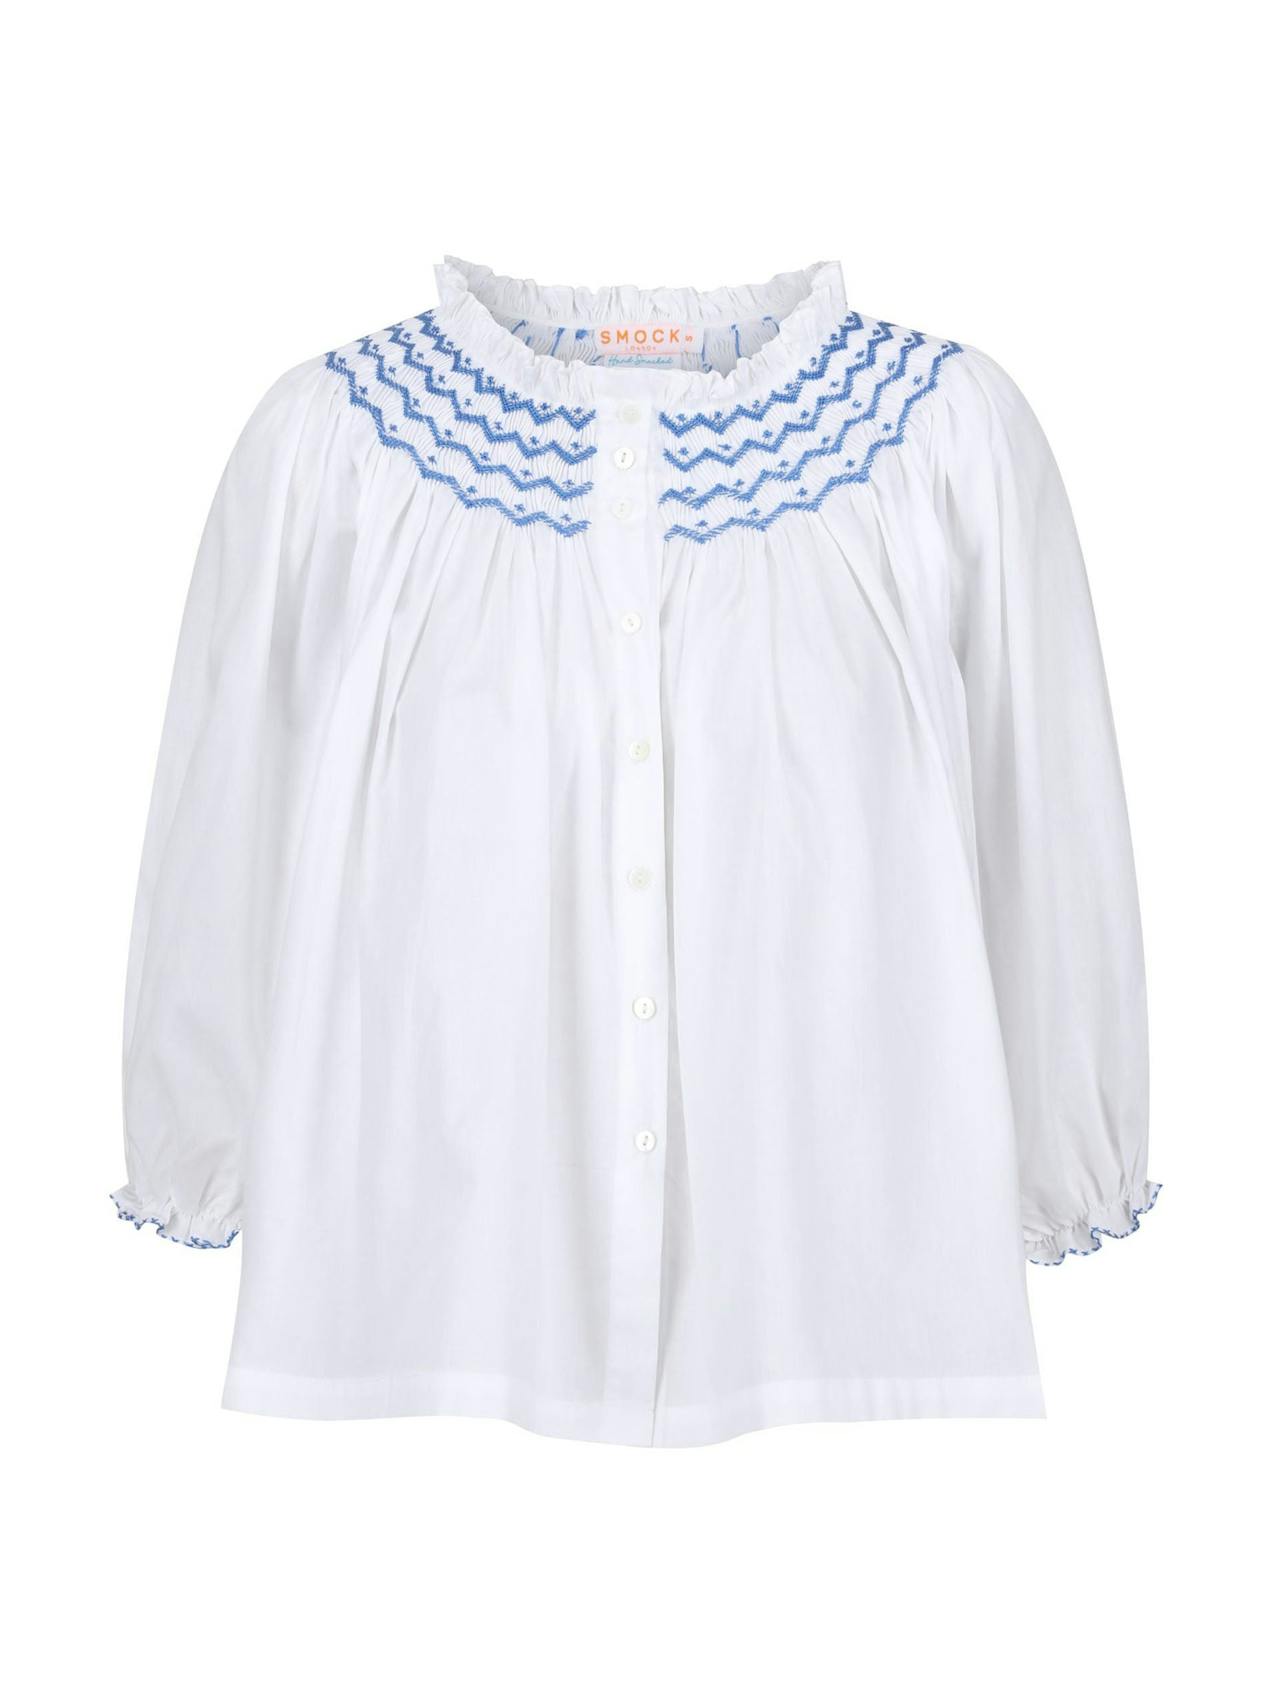 Cleopatra blouse white with sapphire hand smocking  edition 8